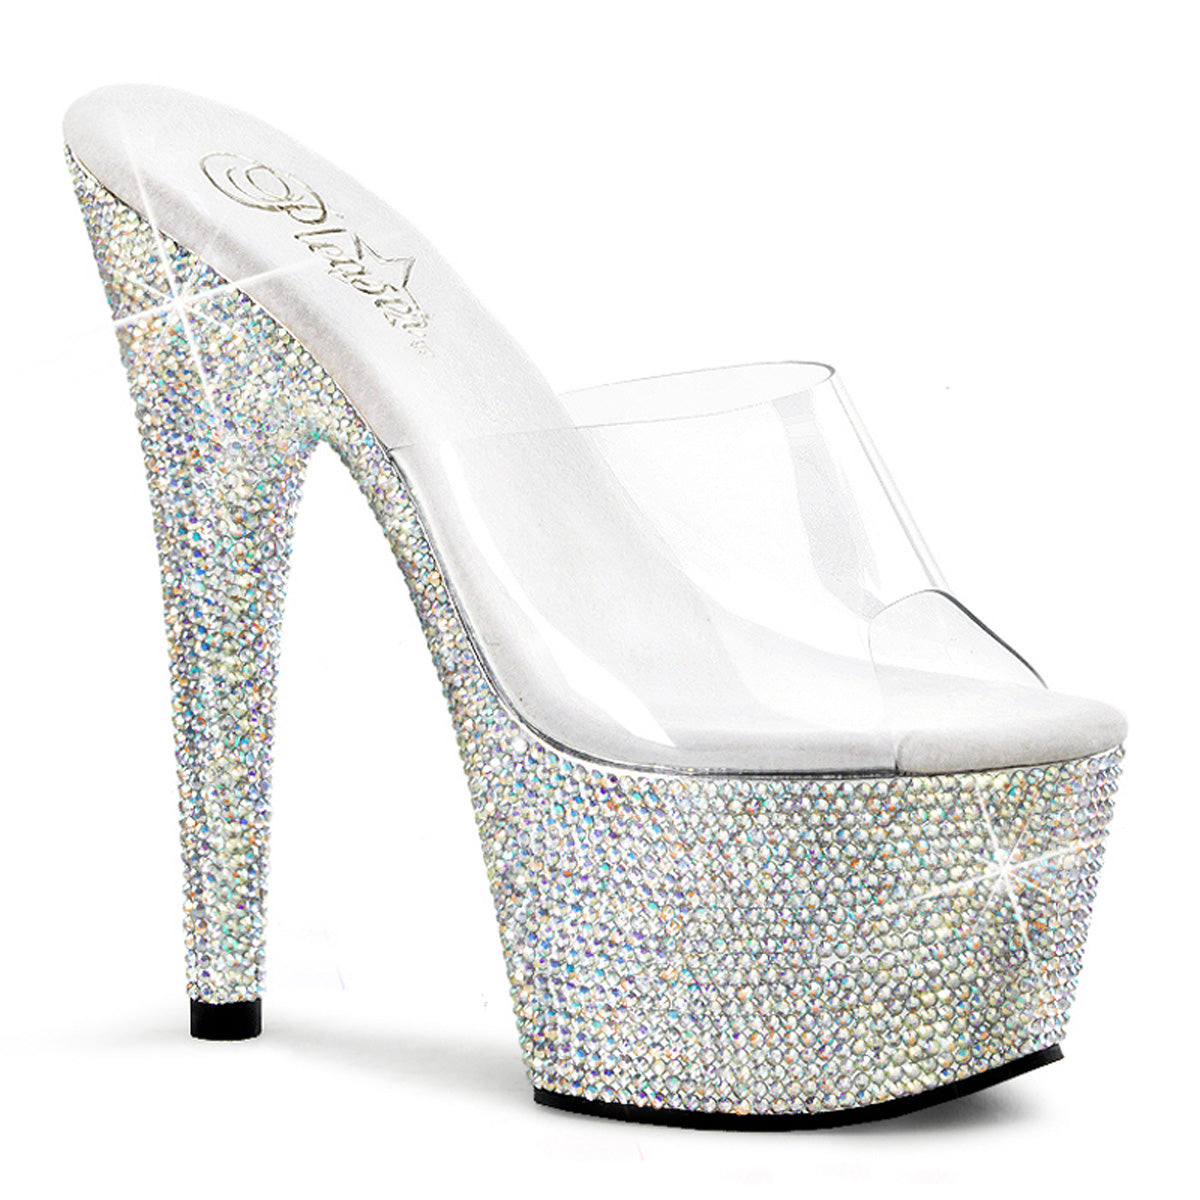 BEJEWELED-701DM Sexy 7 Inch Heel Clear Rhinestones Sexy Shoes